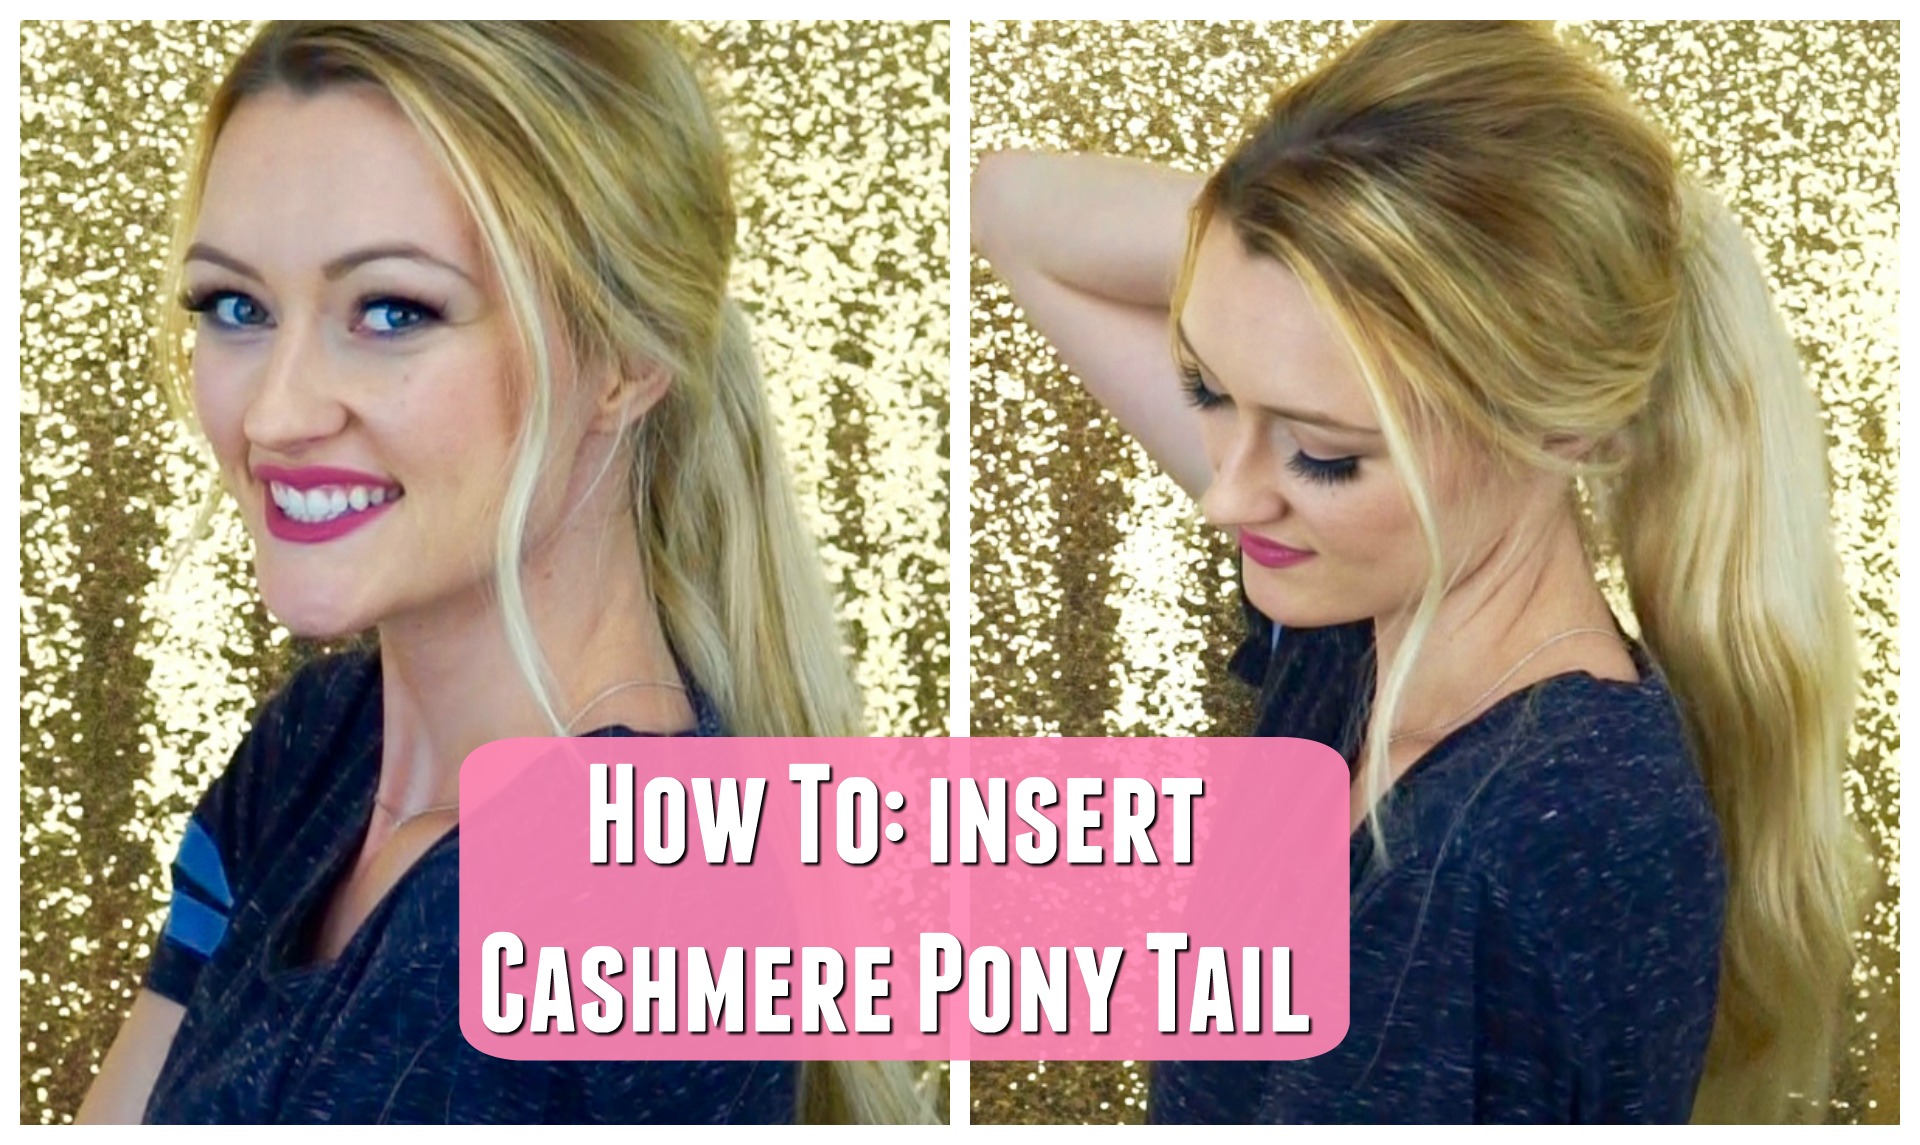 VIDEO: How To Insert Cashmere Ponytail